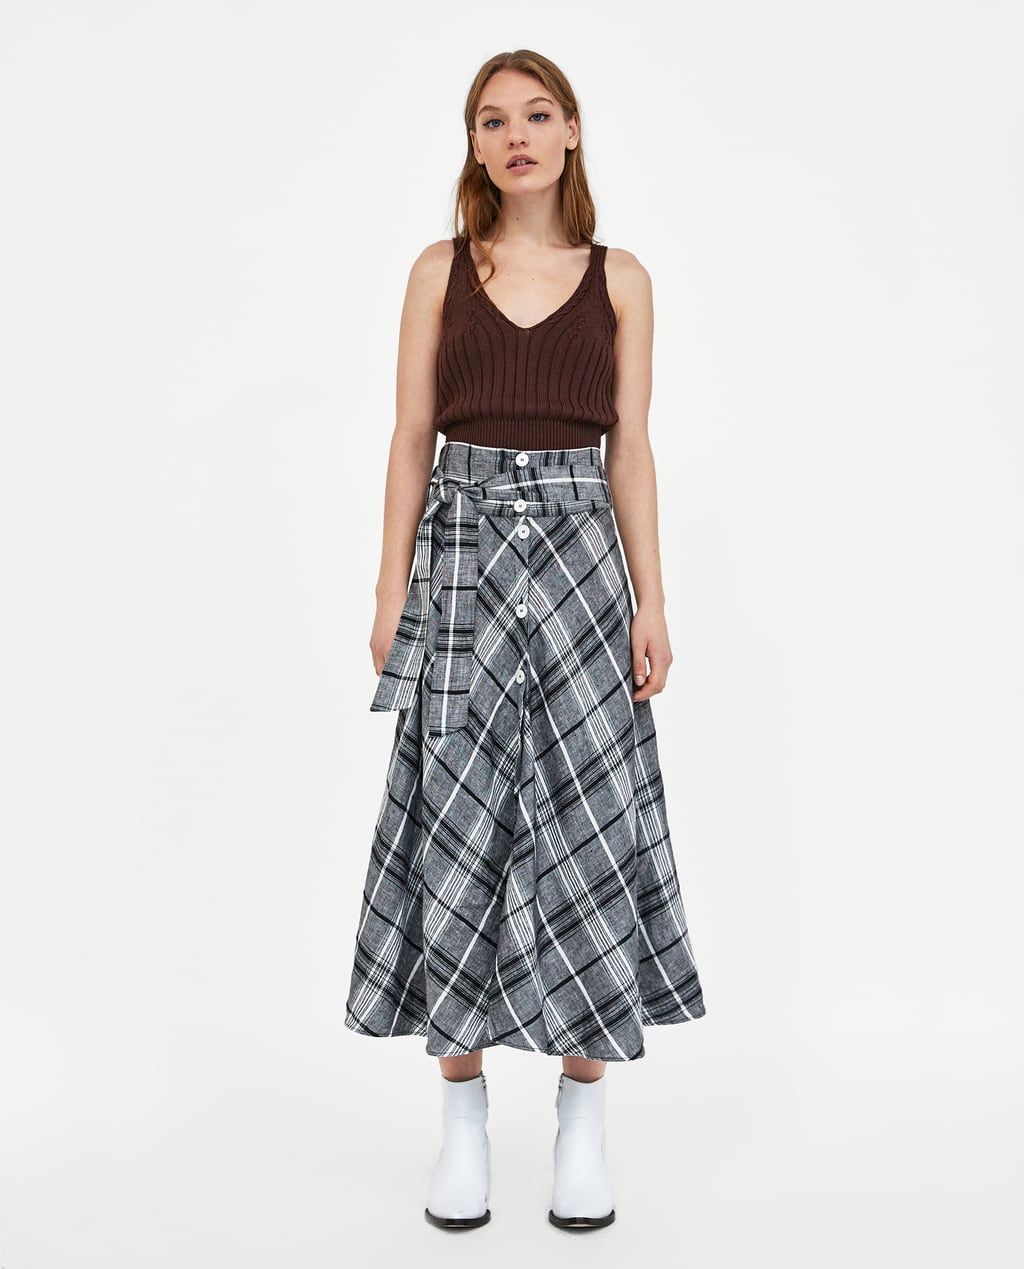 15 plaid skirts to embrace because the runways say so